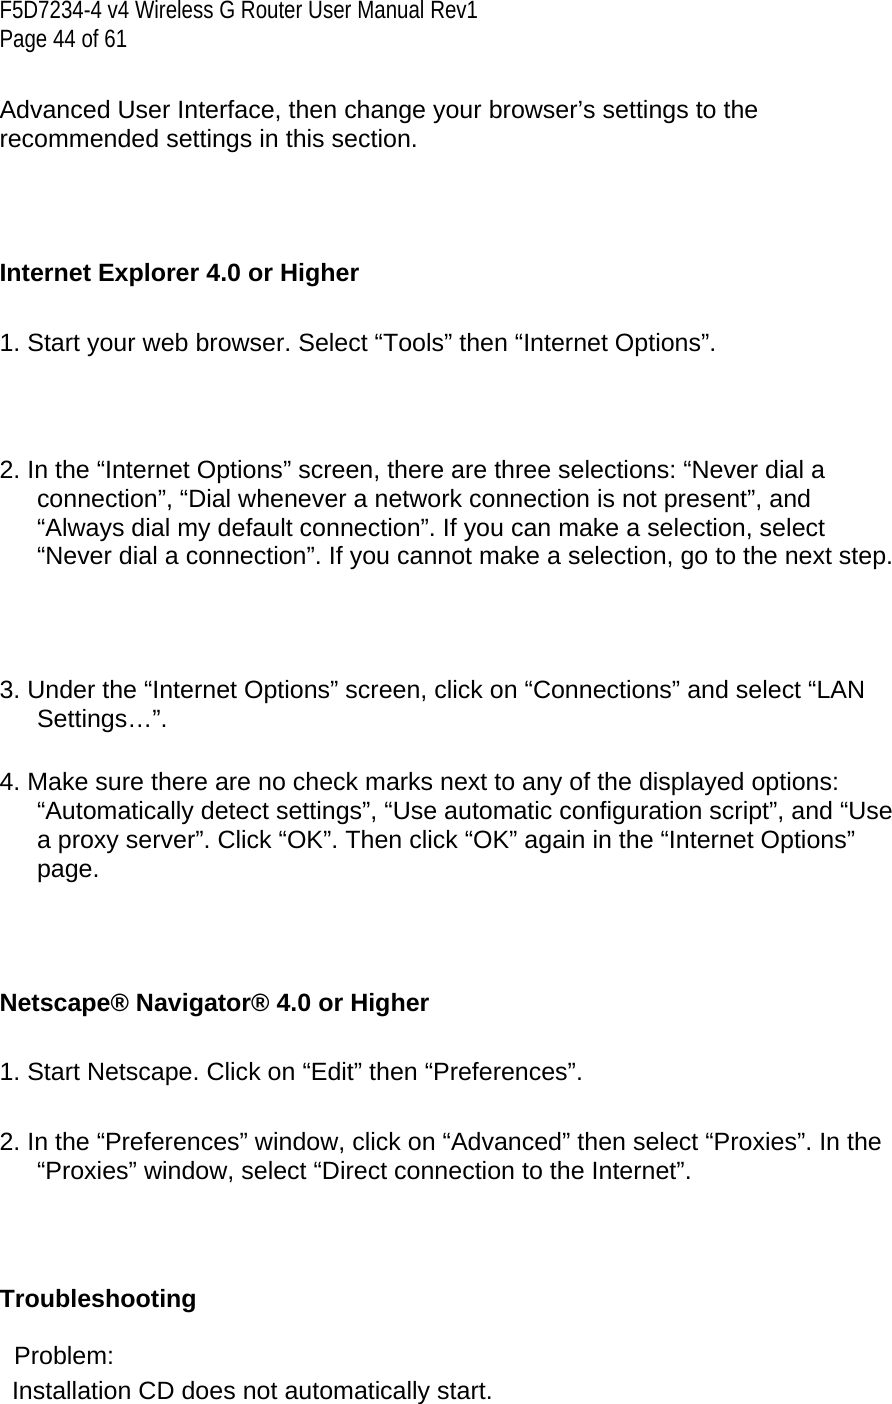 F5D7234-4 v4 Wireless G Router User Manual Rev1  Page 44 of 61   Advanced User Interface, then change your browser’s settings to the recommended settings in this section.    Internet Explorer 4.0 or Higher  1. Start your web browser. Select “Tools” then “Internet Options”.    2. In the “Internet Options” screen, there are three selections: “Never dial a connection”, “Dial whenever a network connection is not present”, and “Always dial my default connection”. If you can make a selection, select “Never dial a connection”. If you cannot make a selection, go to the next step.     3. Under the “Internet Options” screen, click on “Connections” and select “LAN Settings…”.  4. Make sure there are no check marks next to any of the displayed options: “Automatically detect settings”, “Use automatic configuration script”, and “Use a proxy server”. Click “OK”. Then click “OK” again in the “Internet Options” page.     Netscape® Navigator® 4.0 or Higher  1. Start Netscape. Click on “Edit” then “Preferences”.  2. In the “Preferences” window, click on “Advanced” then select “Proxies”. In the “Proxies” window, select “Direct connection to the Internet”.     Troubleshooting   Problem:  Installation CD does not automatically start. 